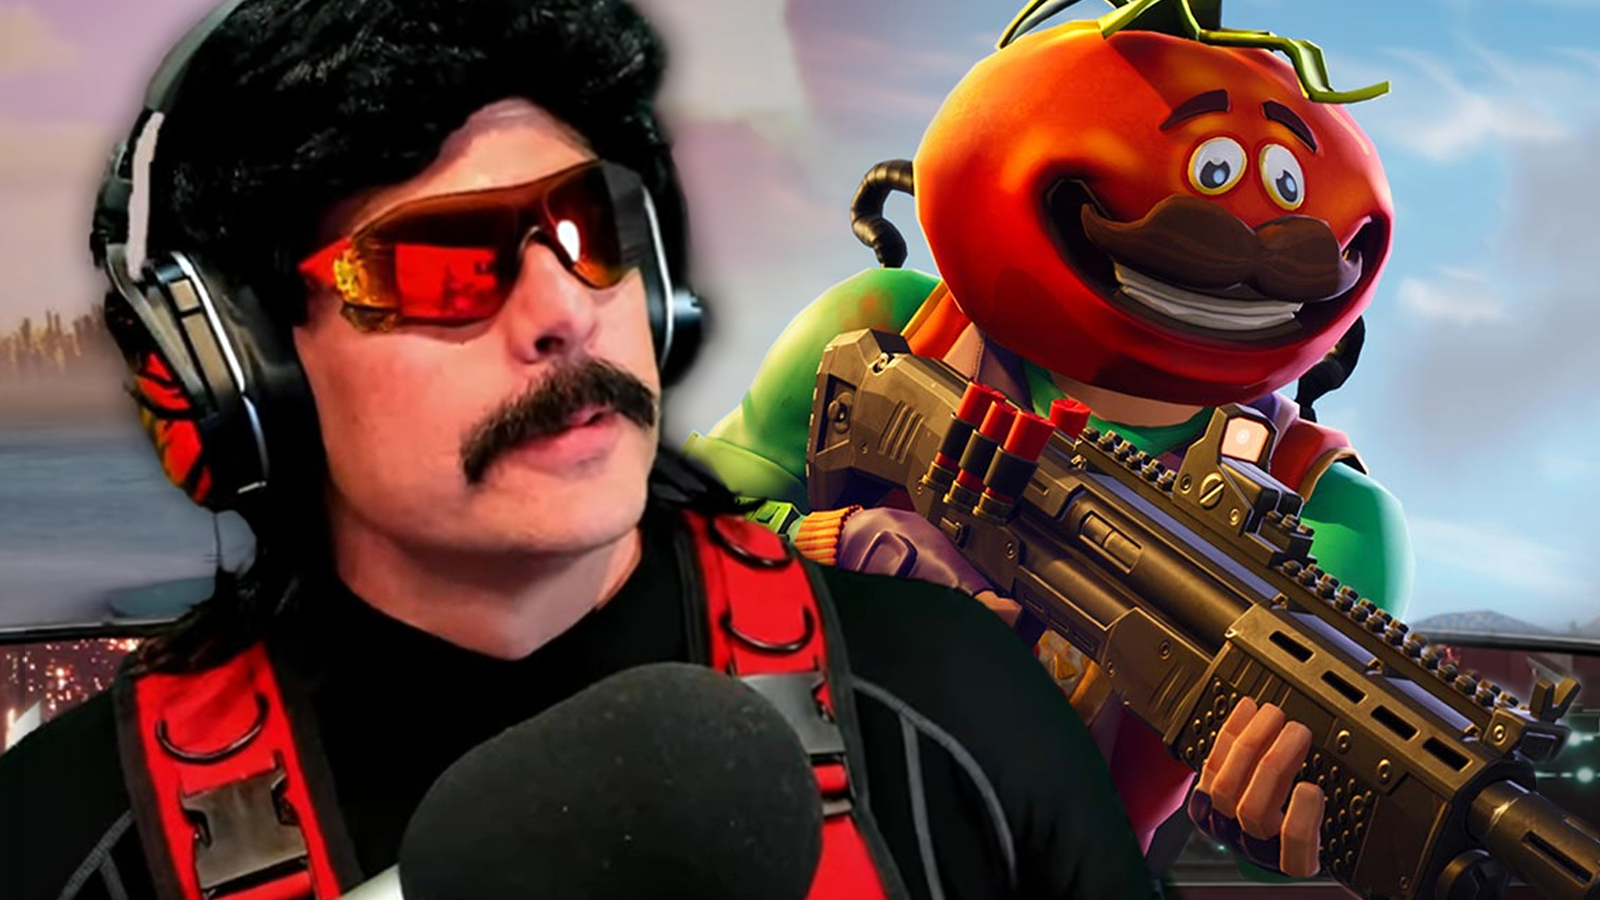 Dr Disrespect looking at Tomato Guy from Fortnite.